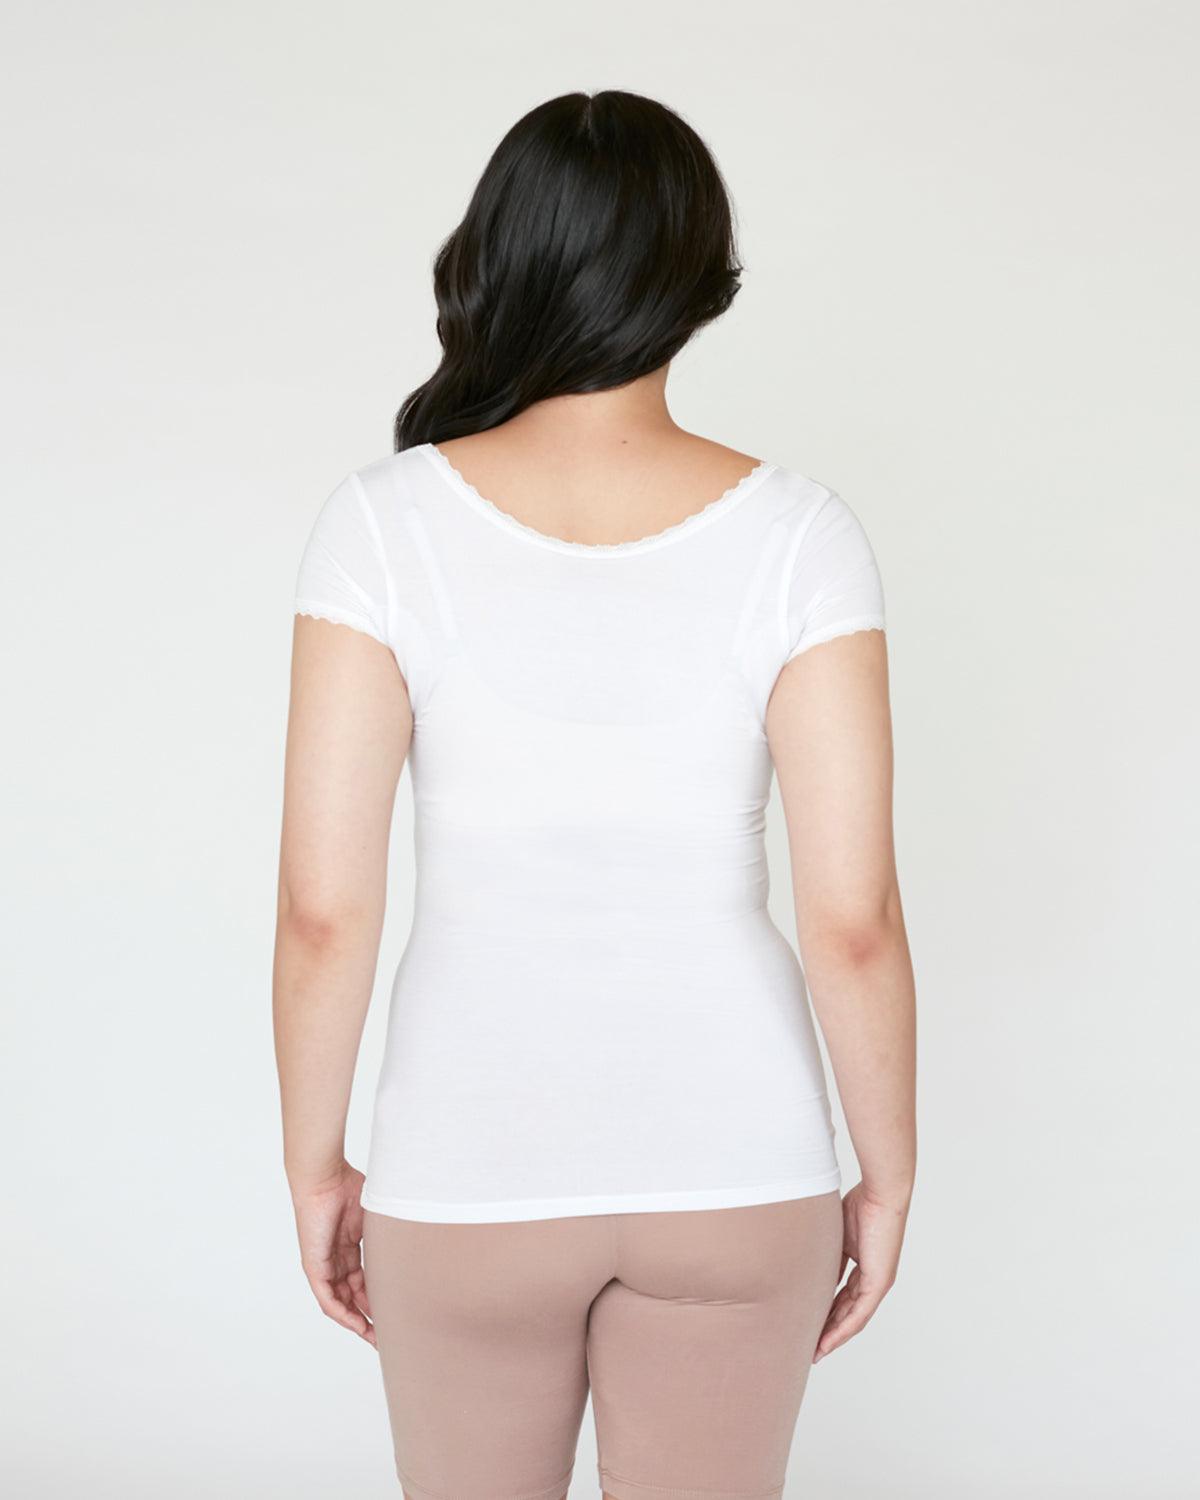 "#color_WHITE|Emi is 5'7.5" and wears a size S